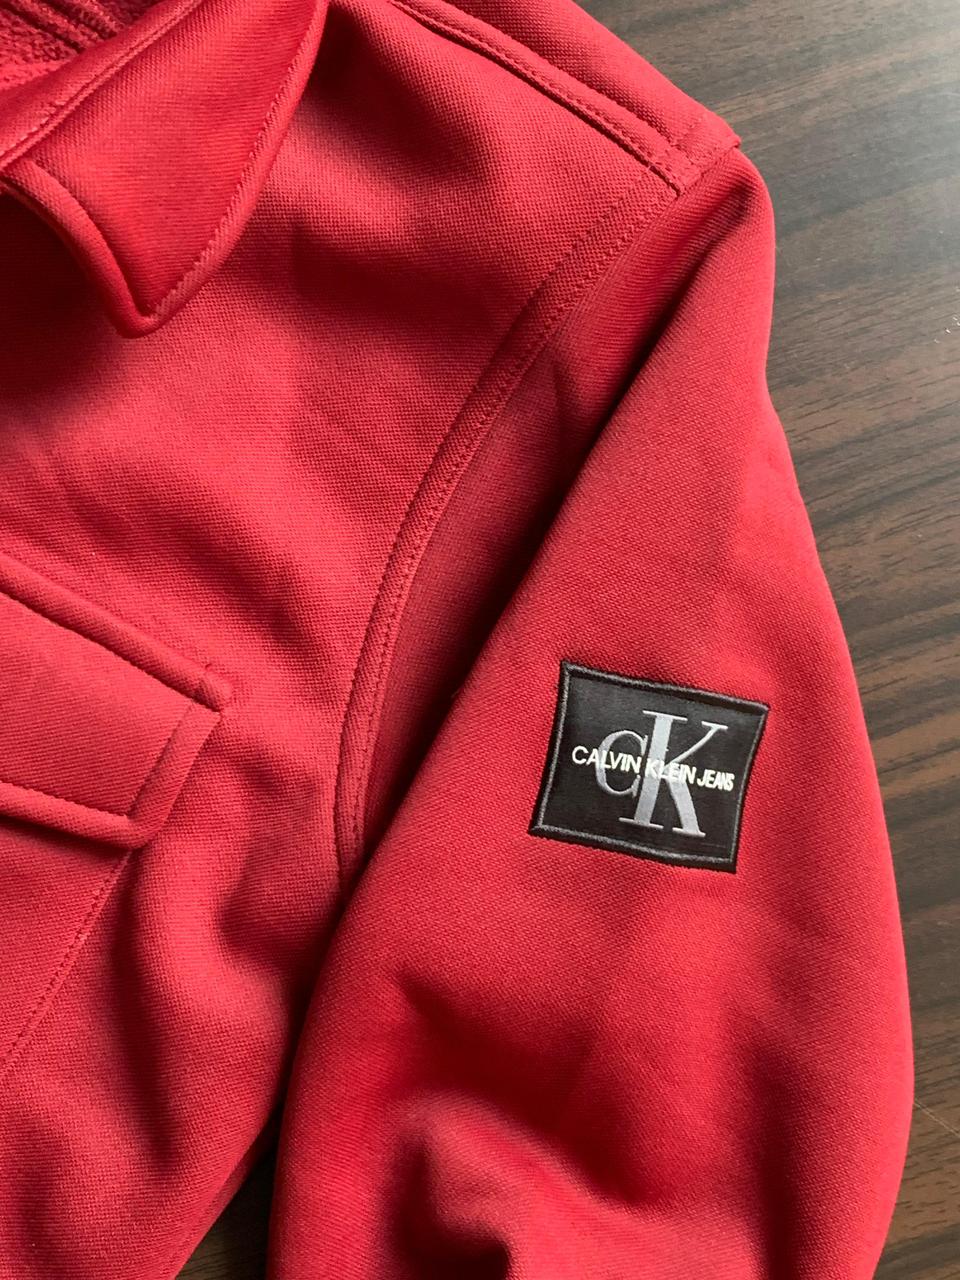 Calvin Klein Imported Fabric Jacket